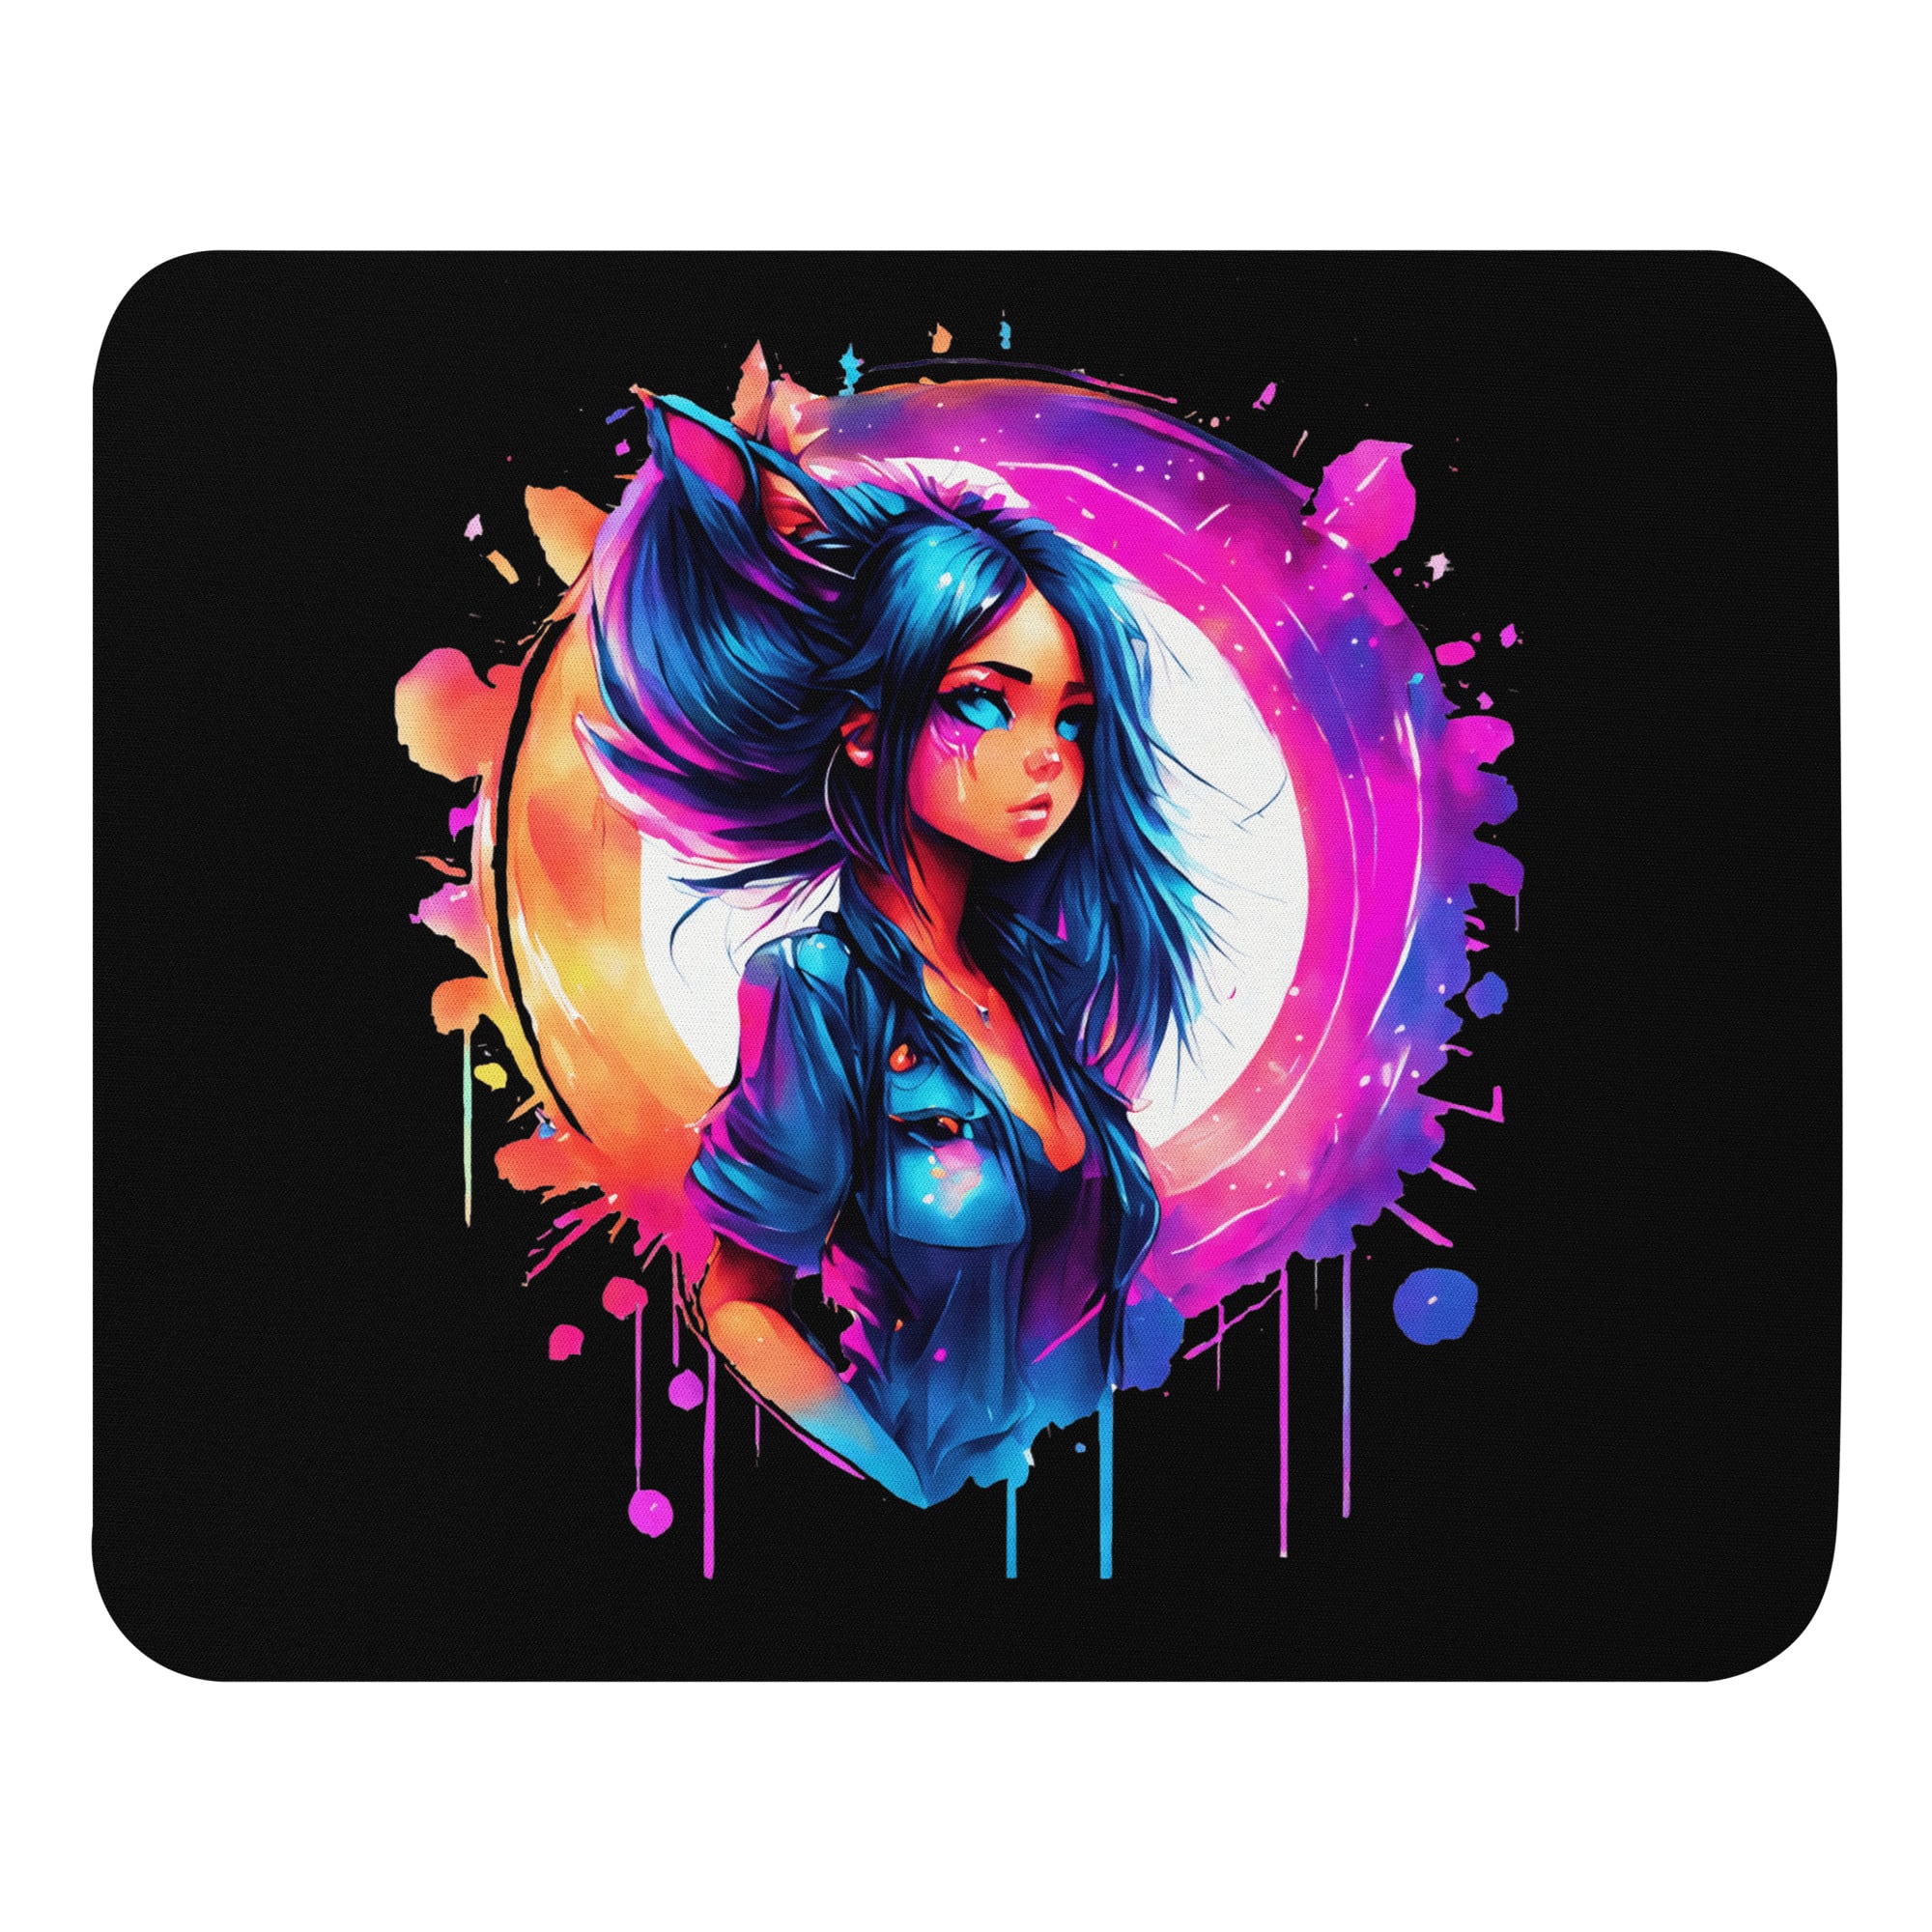 Abstract Anime Girl Mouse Pad Cute Anime Mouse Pad Large Anime Mouse Pad Video game store Gaming merchandise Gaming accessories shop Online gaming store Video game shop near me Gaming console store PC gaming store Gaming gear shop Retro gaming shop Board game shop Anime merchandise Anime store online Japanese anime shop Anime figurines Manga shop Anime DVDs Anime accessories Anime apparel Anime collectibles Anime gifts